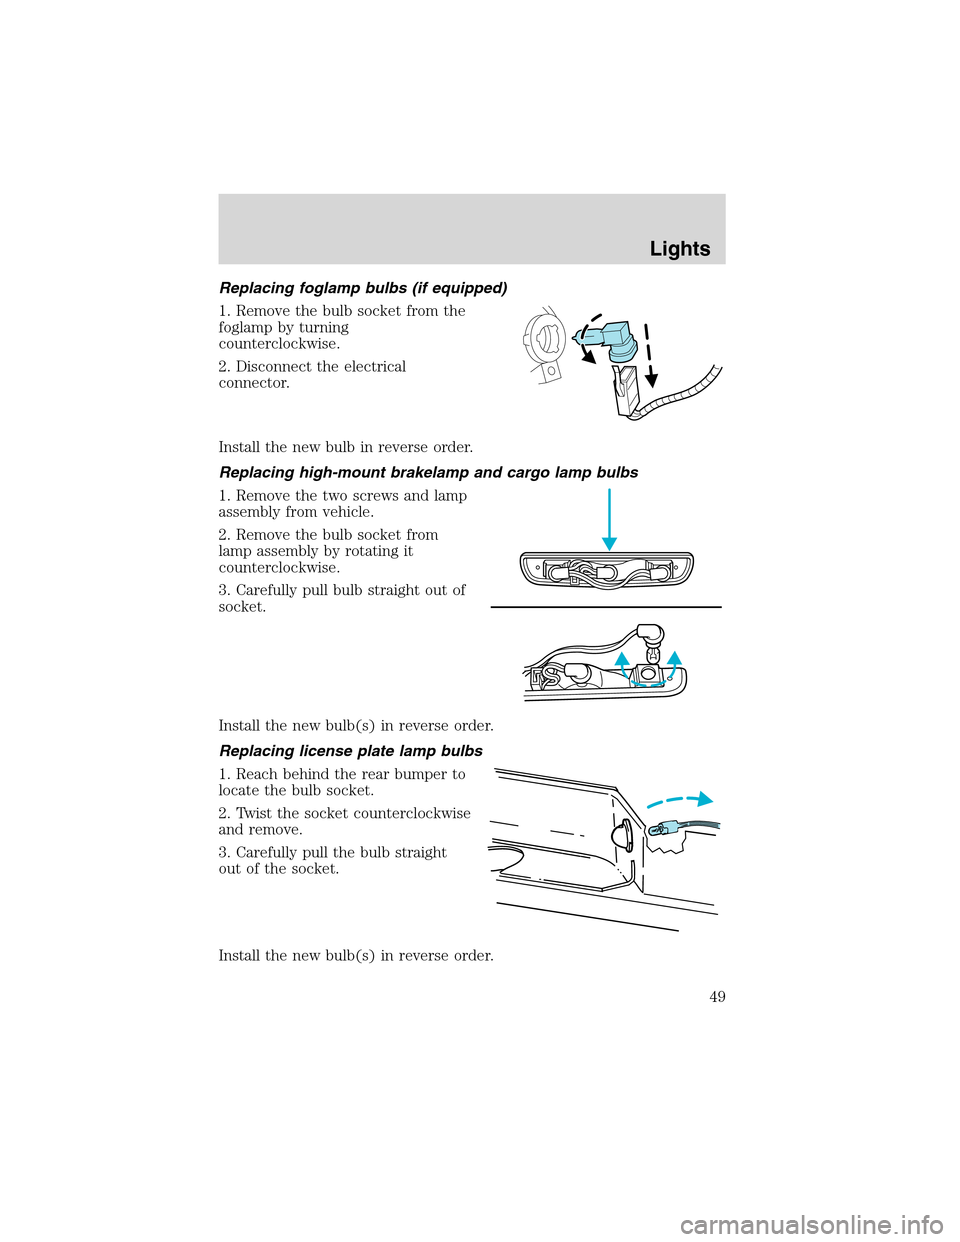 FORD RANGER 2003 2.G Service Manual Replacing foglamp bulbs (if equipped)
1. Remove the bulb socket from the
foglamp by turning
counterclockwise.
2. Disconnect the electrical
connector.
Install the new bulb in reverse order.
Replacing h